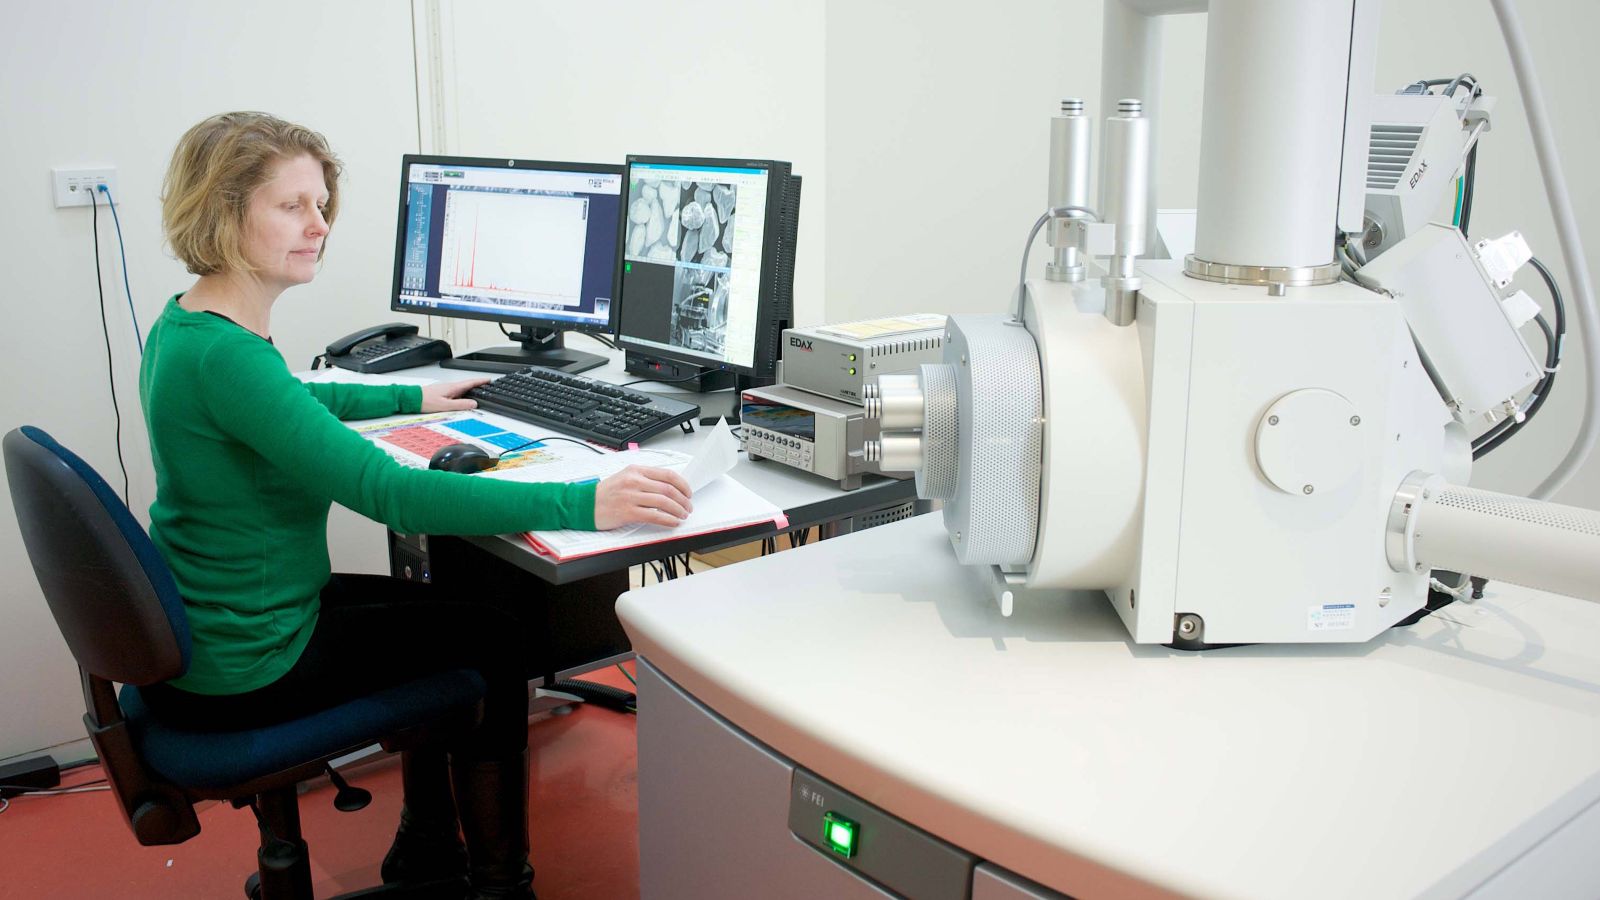 Photograph of an electron microscope in use.